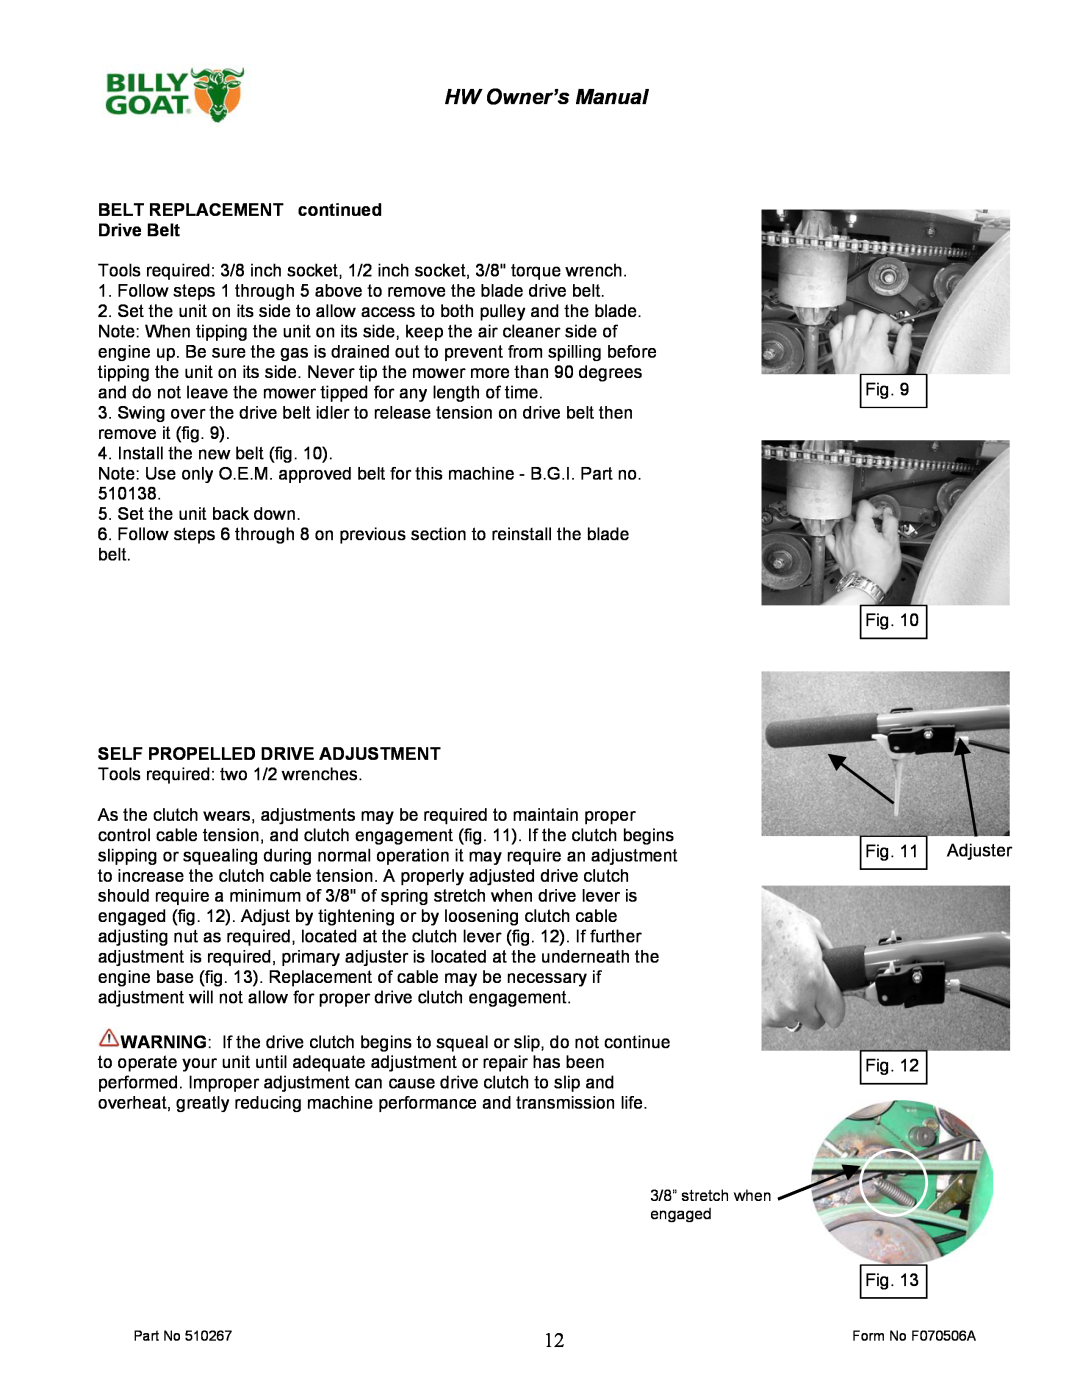 Billy Goat 510223 owner manual BELT REPLACEMENT continued Drive Belt, Self Propelled Drive Adjustment 